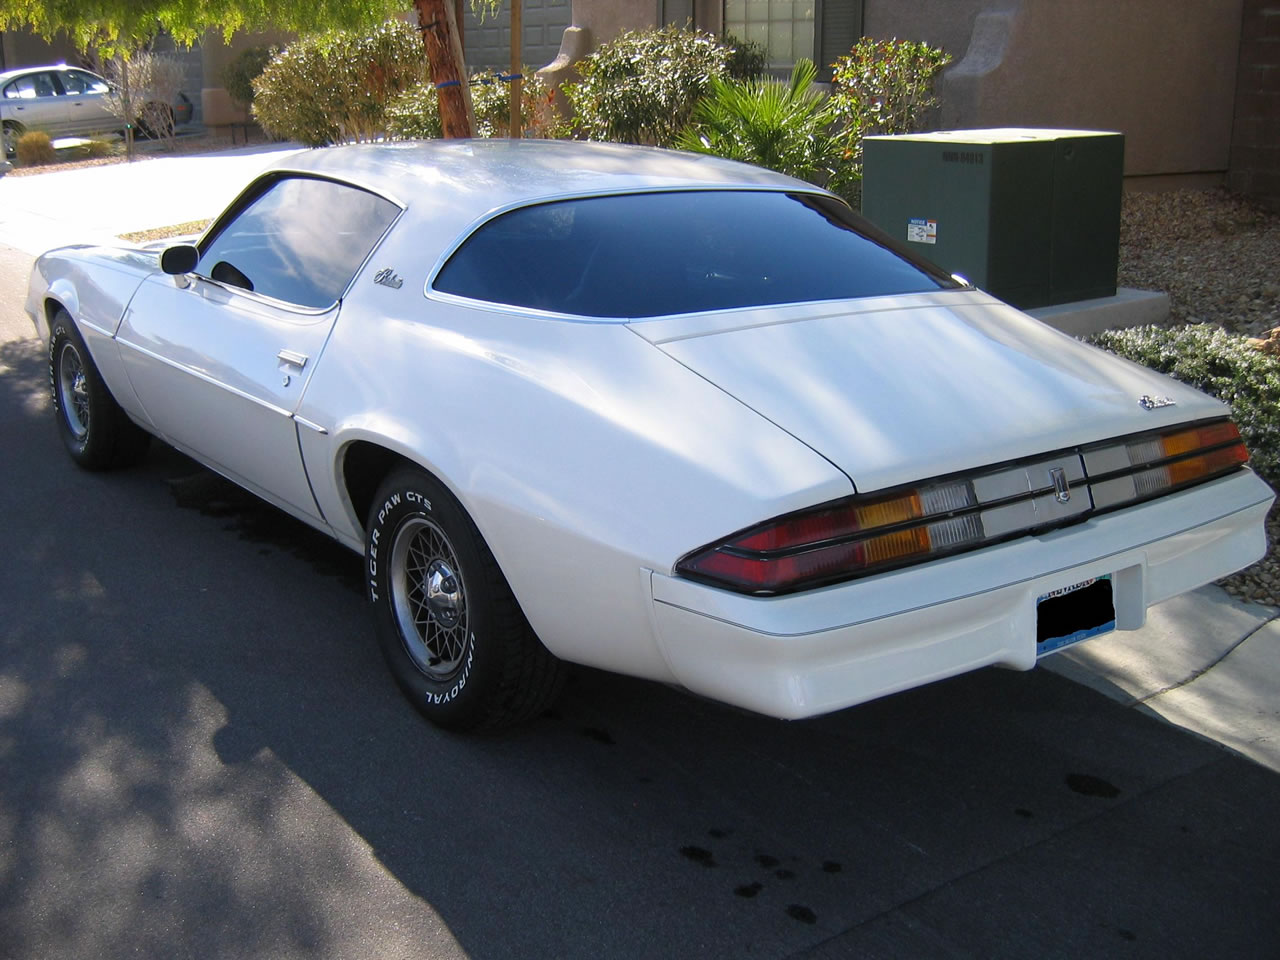 PRICE REDUCED-1979 Chevrolet Camaro - Excellent Condition! For Sale